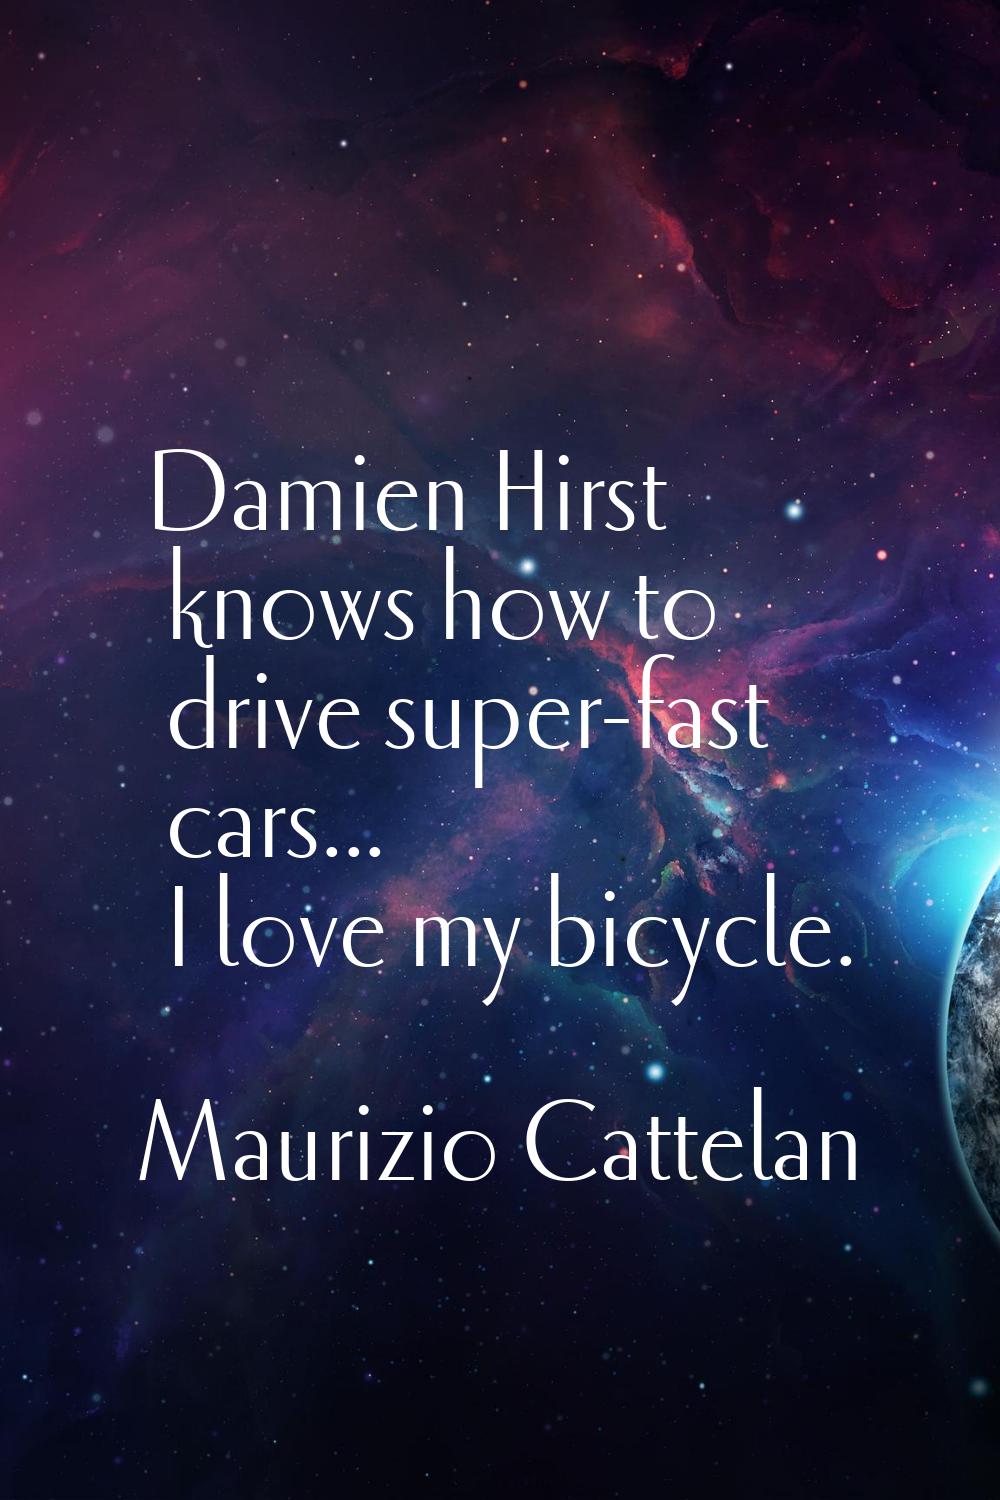 Damien Hirst knows how to drive super-fast cars... I love my bicycle.